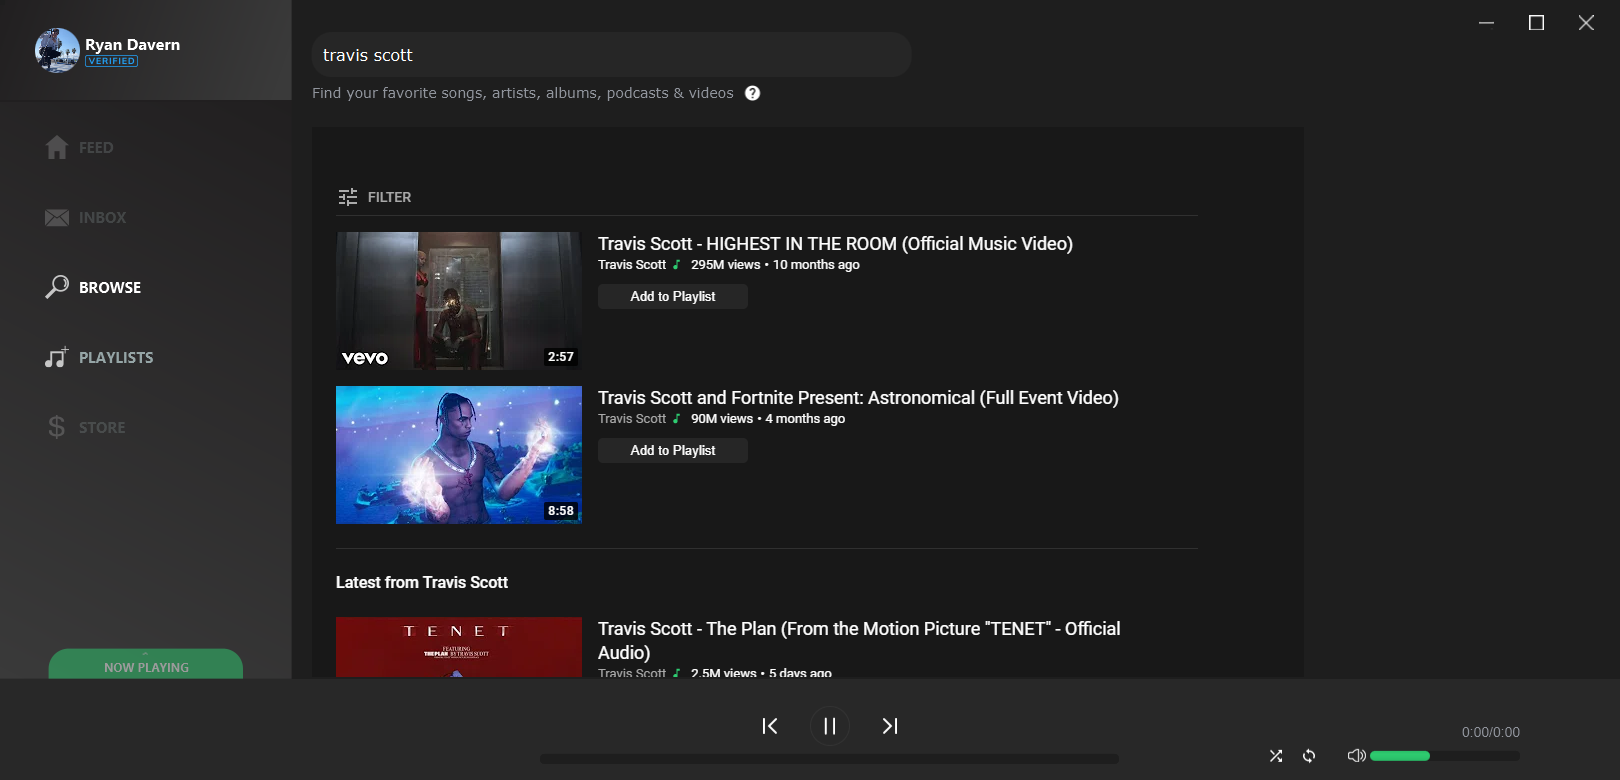 Browse Page lets you search for music, import playlists & view artists.